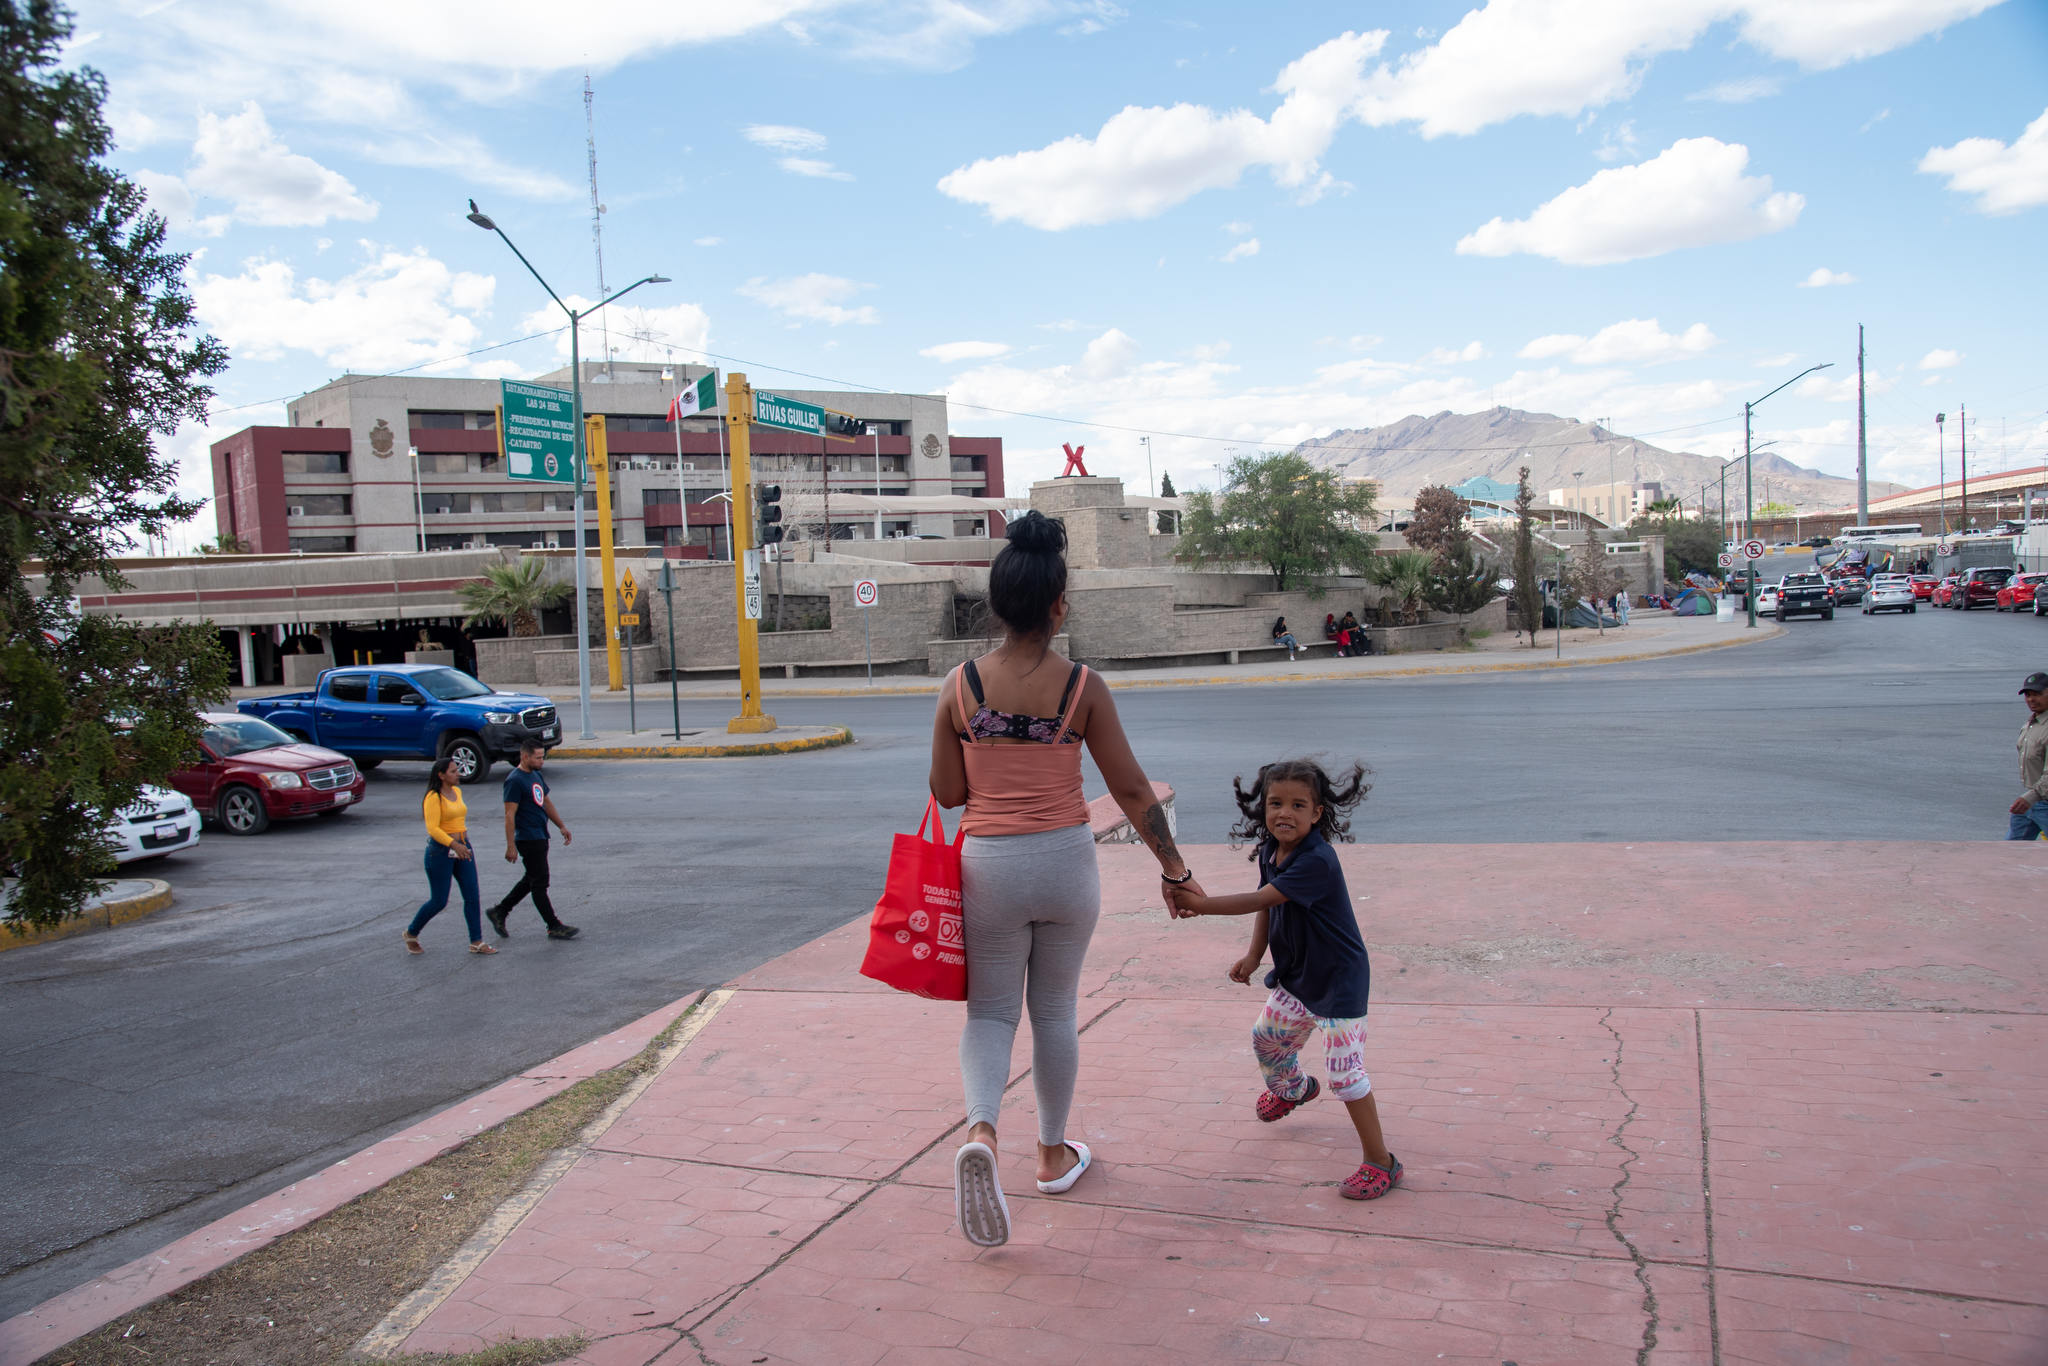 A Latinx woman walks with her back to the camera, holding her young daughter's hand, cwho is looking back at us as she energetically walks with mom down an open urban street.